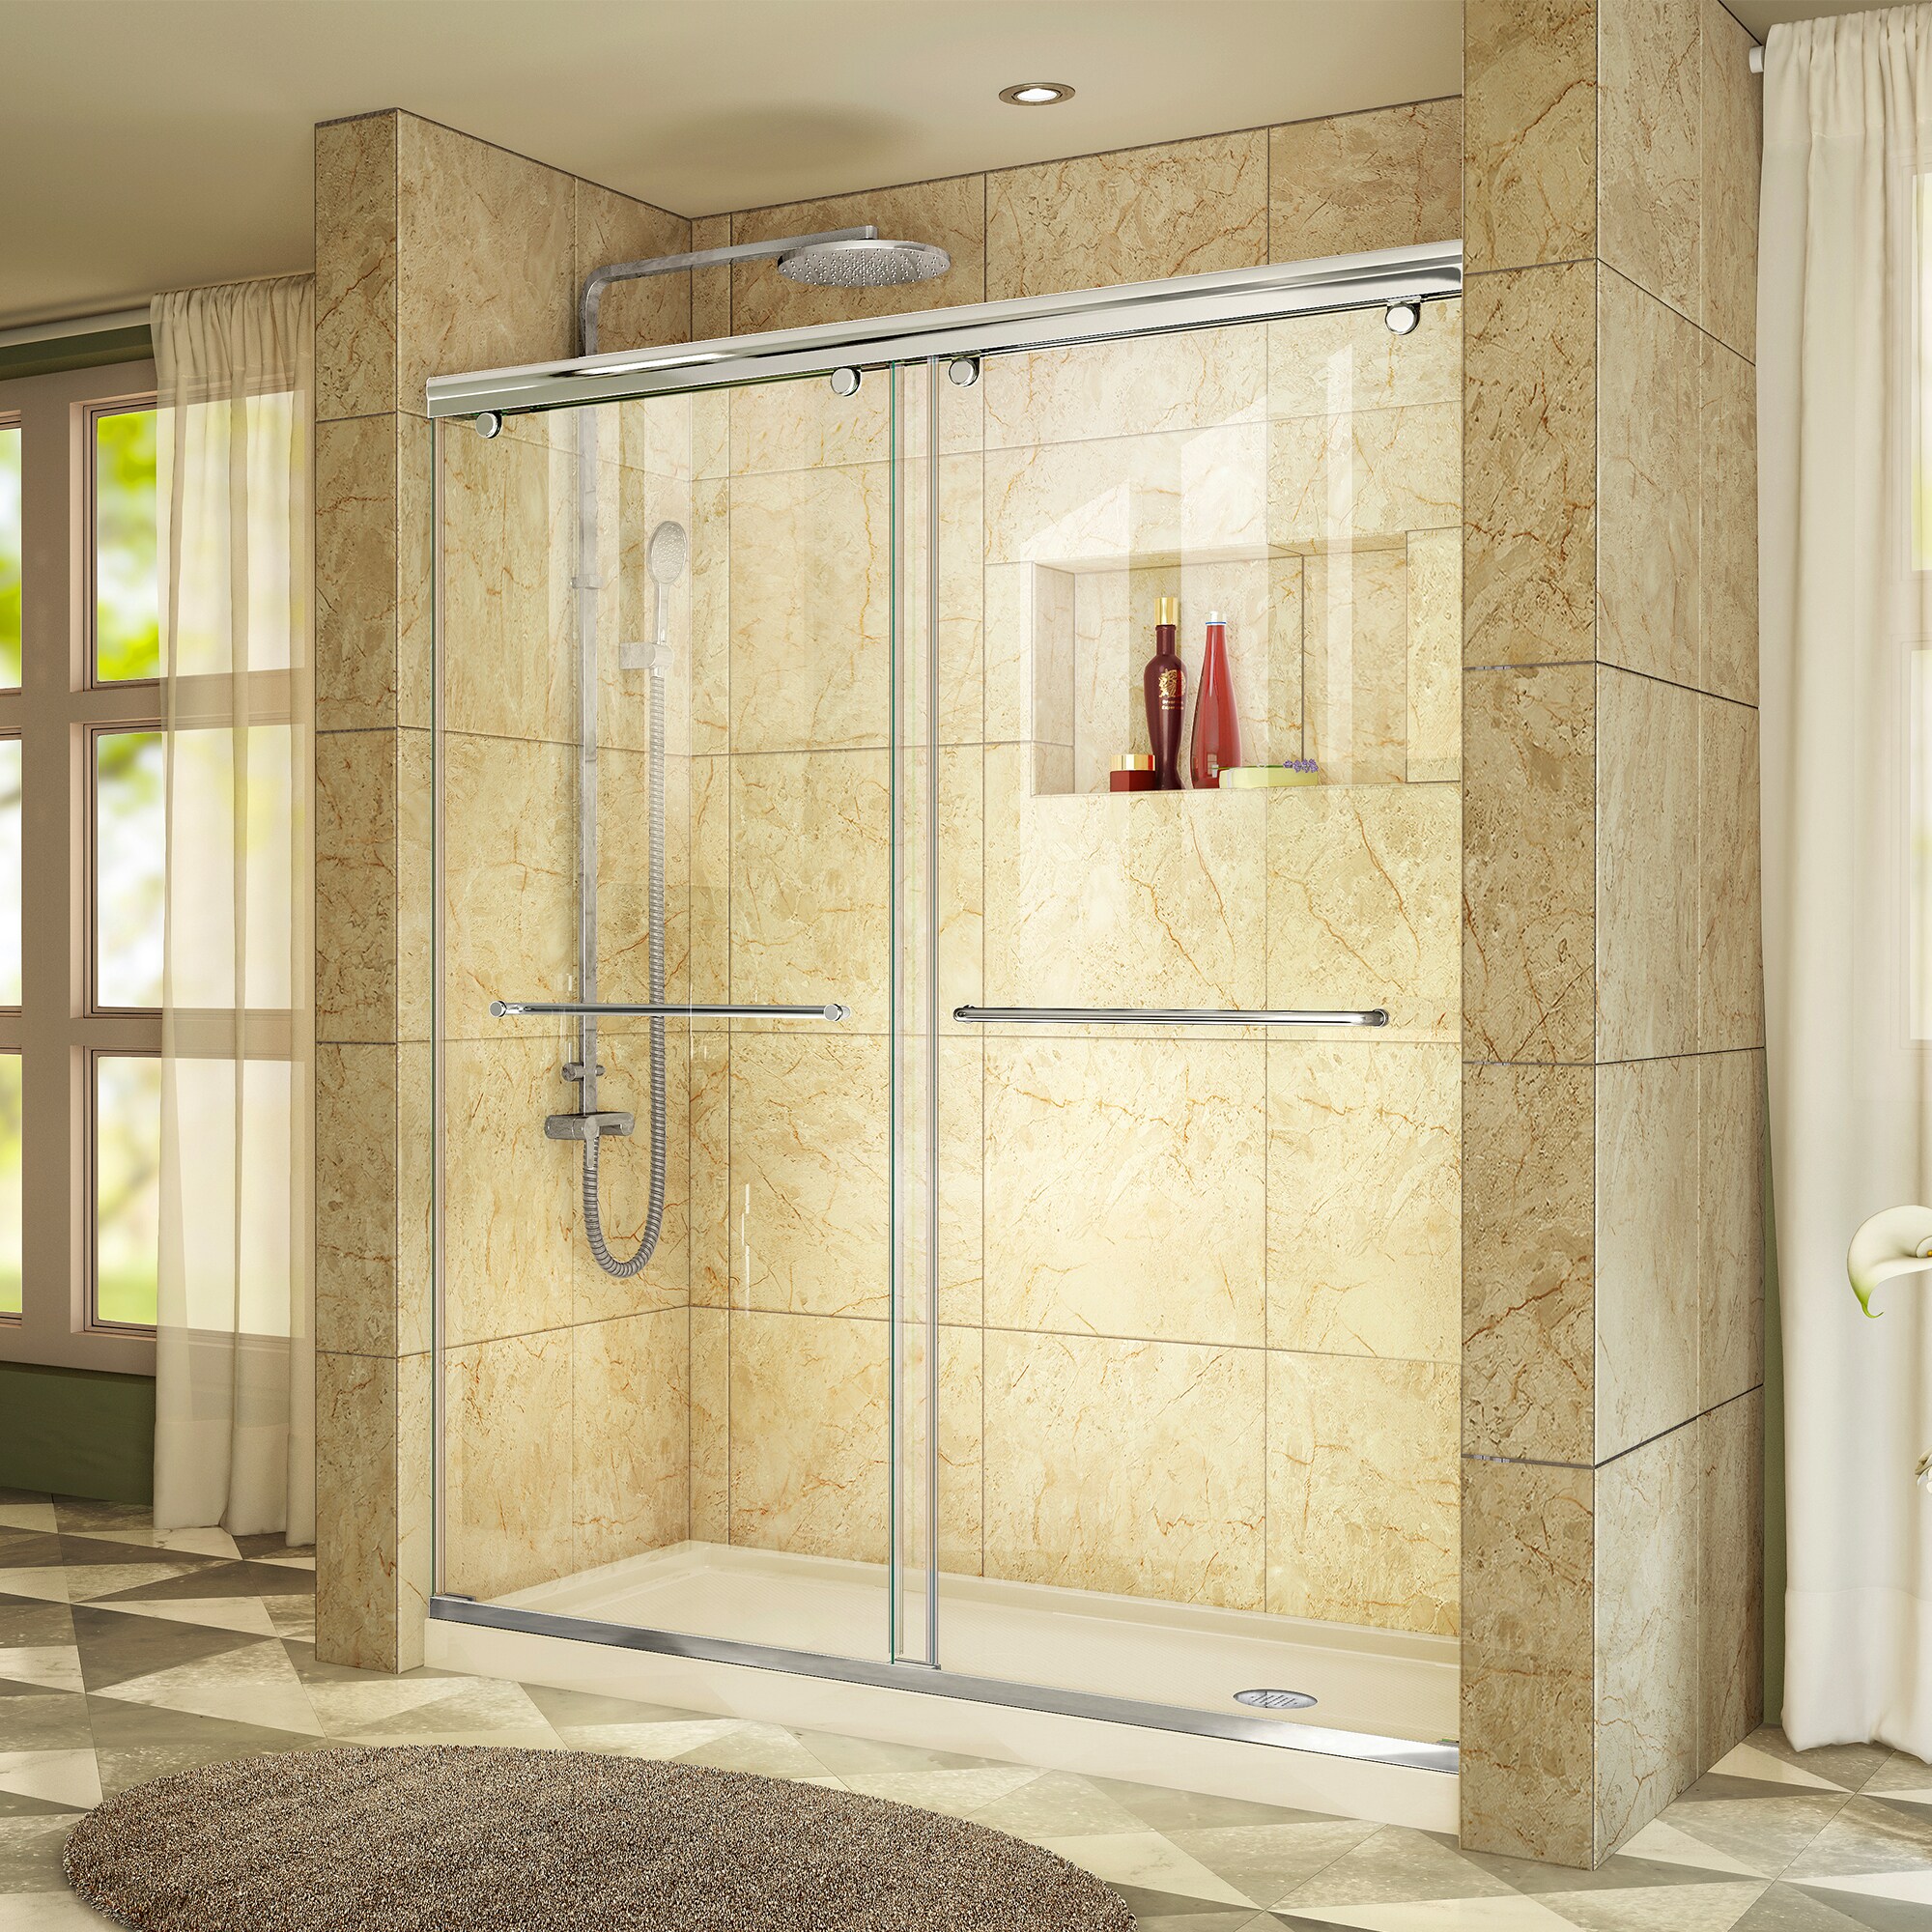 DreamLine Charisma Biscuit 2-Piece 30-in x 60-in x 79-in Rectangular Alcove Shower Kit (Right Drain) with Base and Door Included